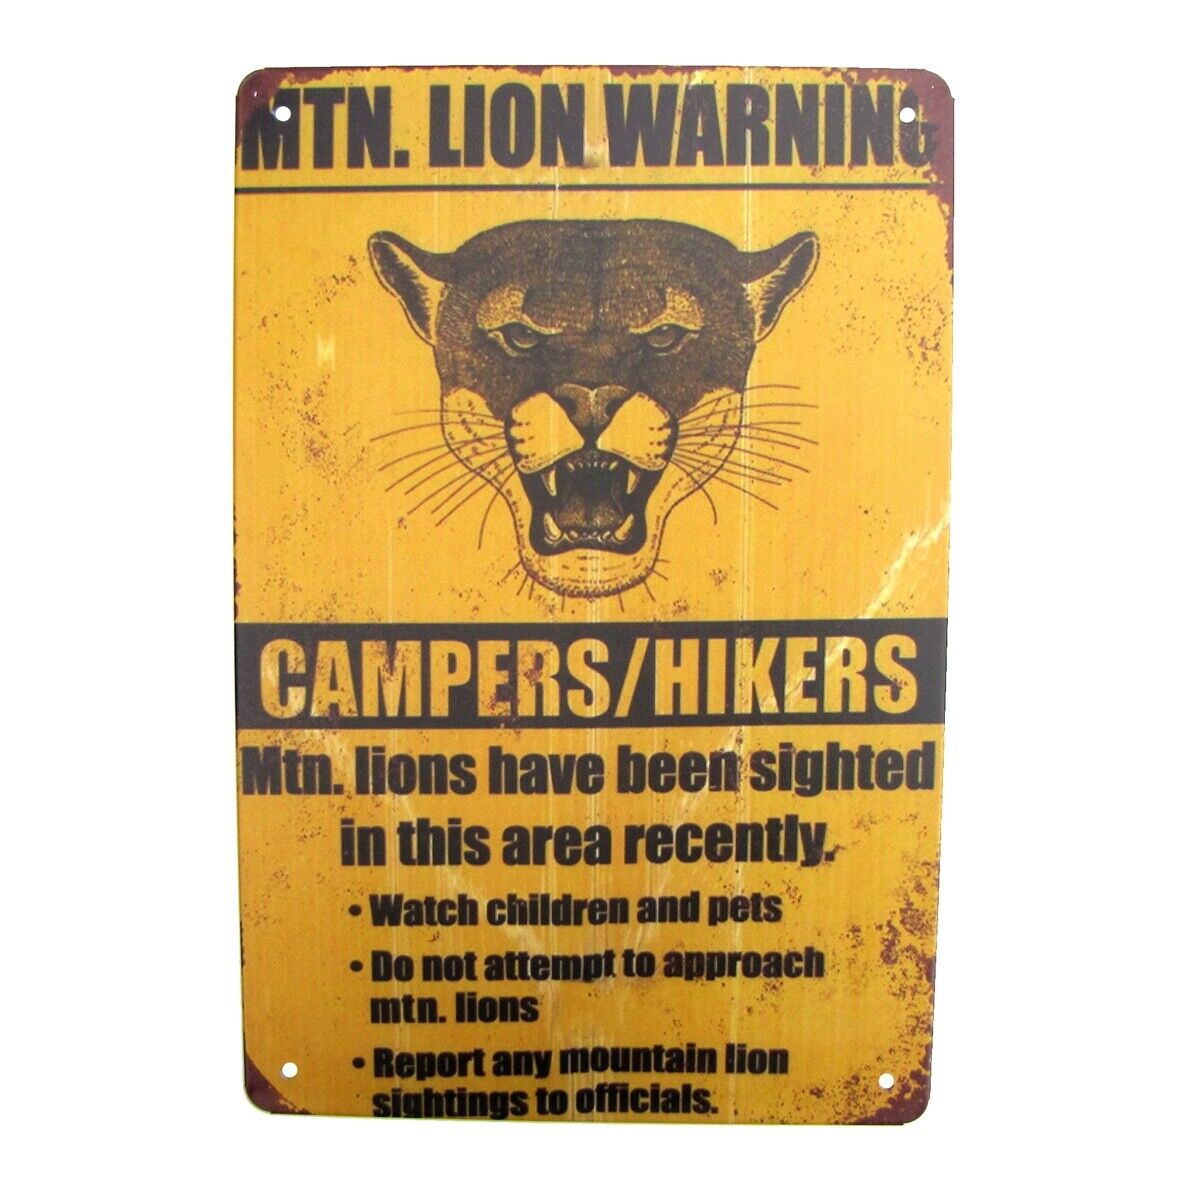 Metal Mountain Lion Warning Beware Caution Wall Sign Outdoor Hunting Cabin Decor